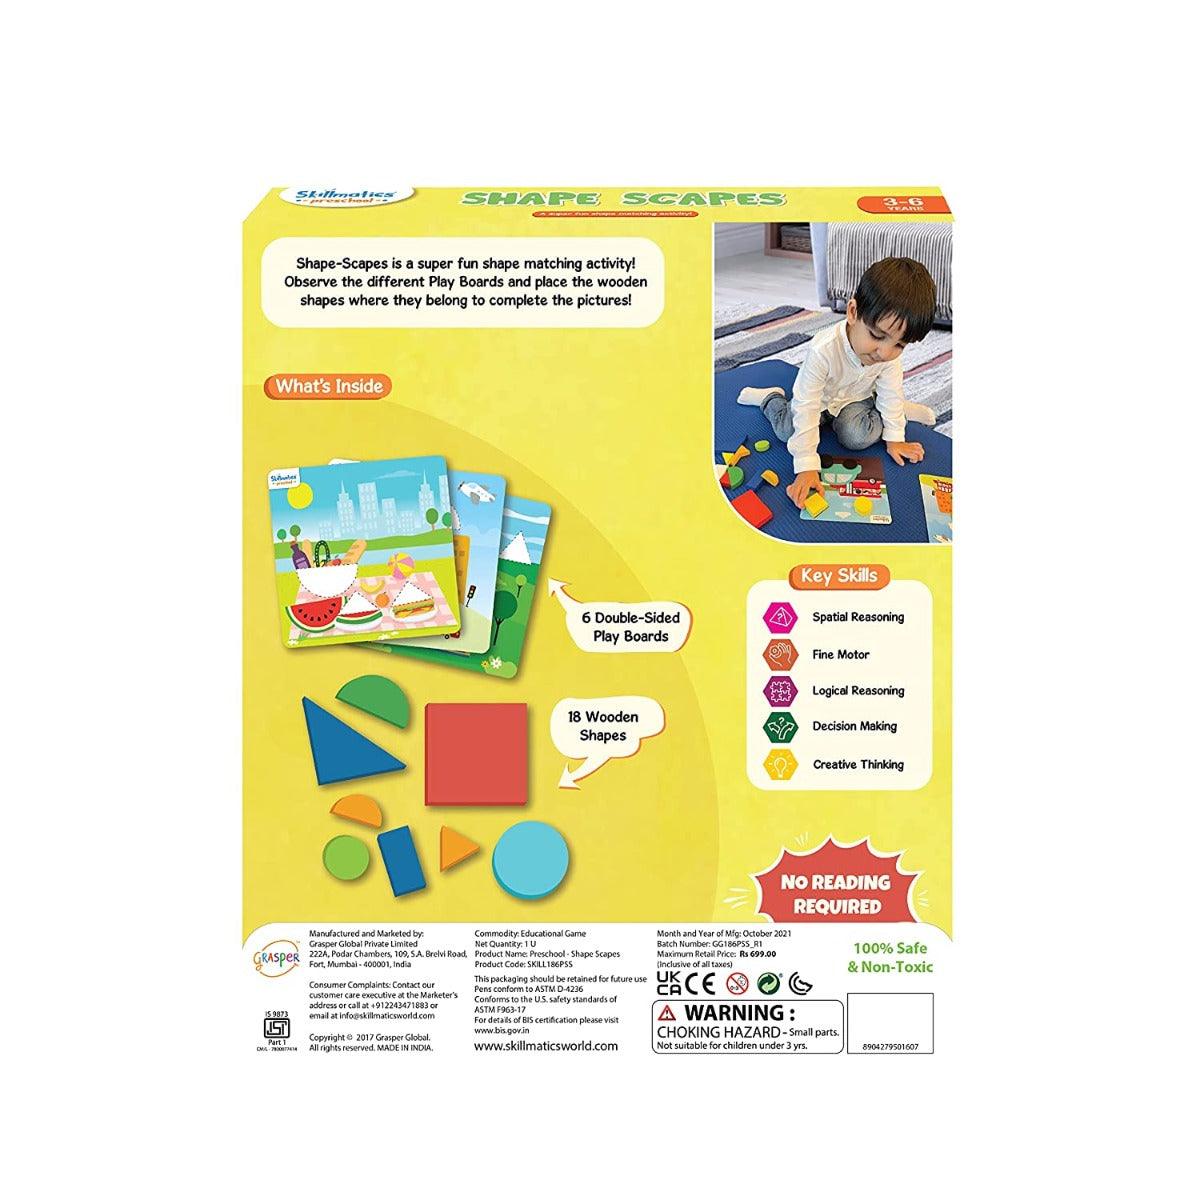 Skillmatics Shapes Scapes - Shape Matching Activity Educational Game for Ages 3-6 Years